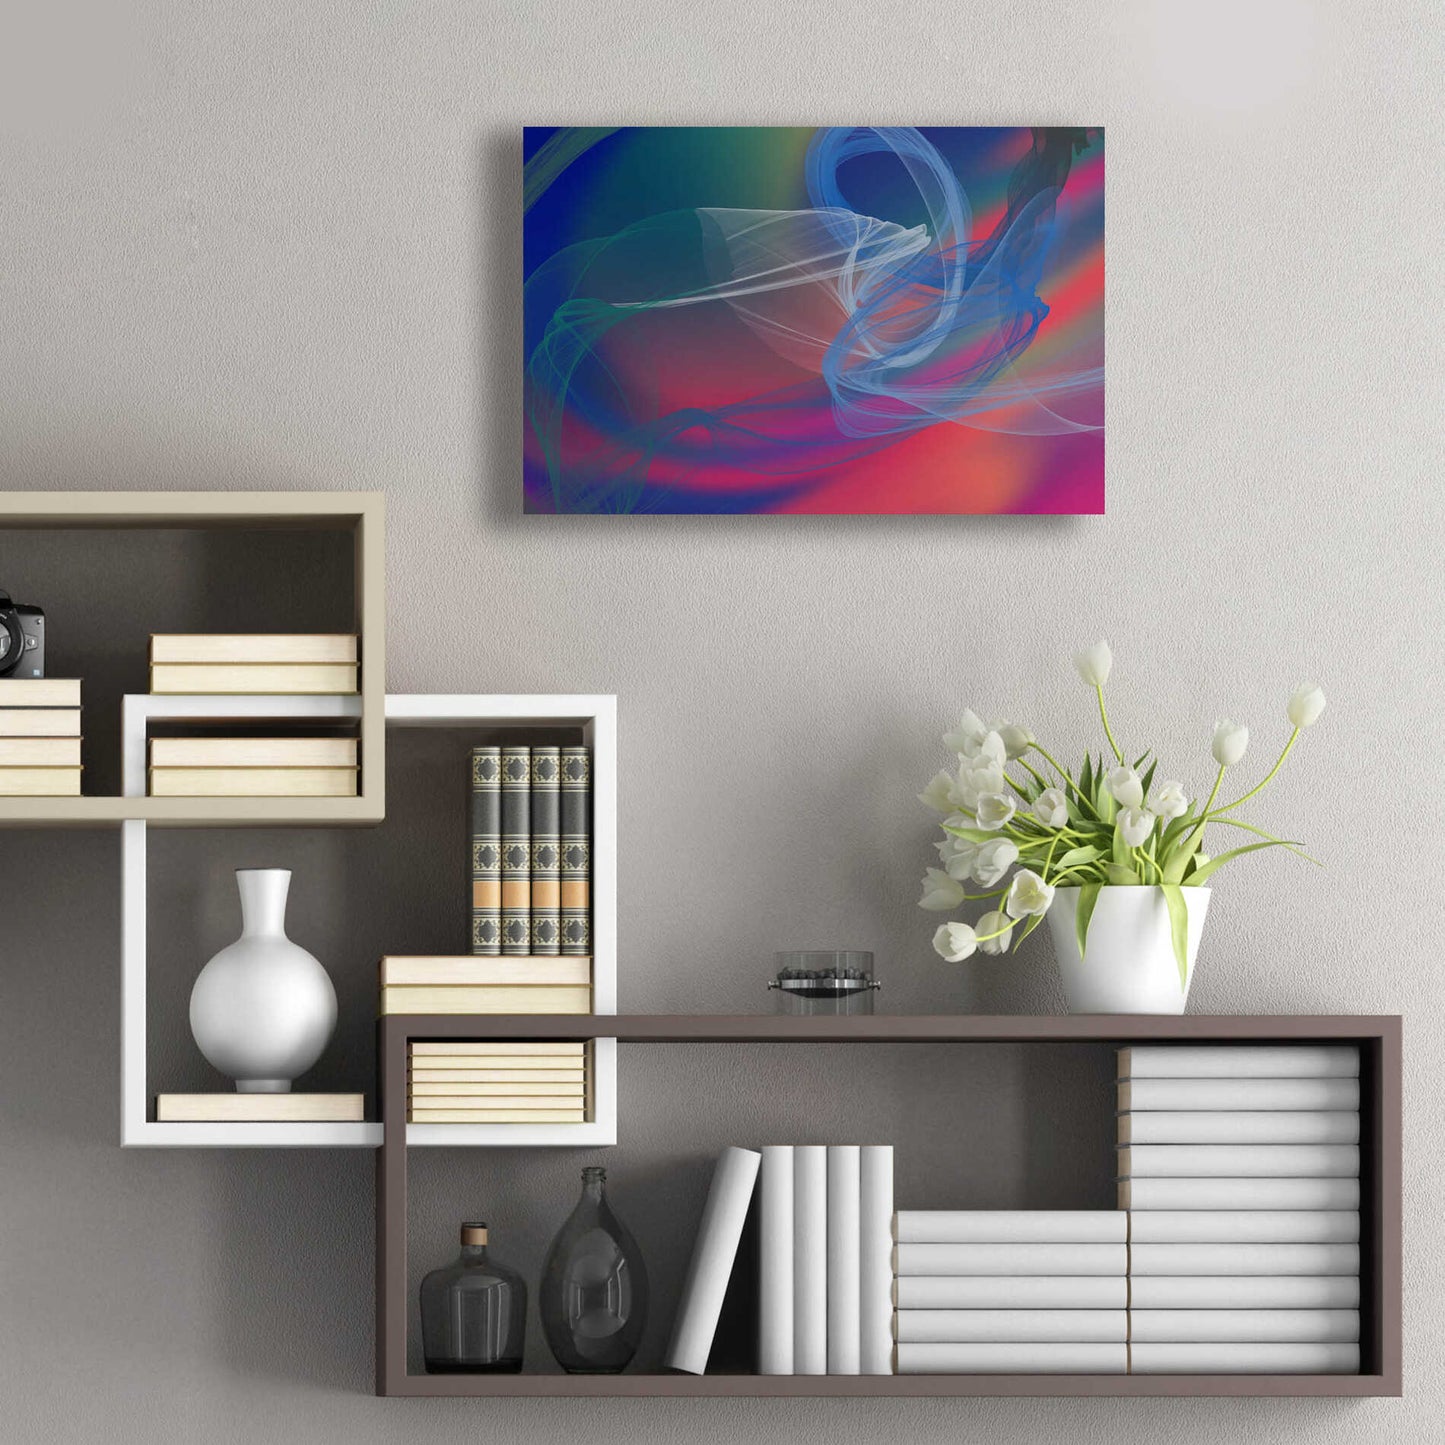 Epic Art 'Inverted Color In The Lines 4' by Irena Orlov Acrylic Glass Wall Art,24x16